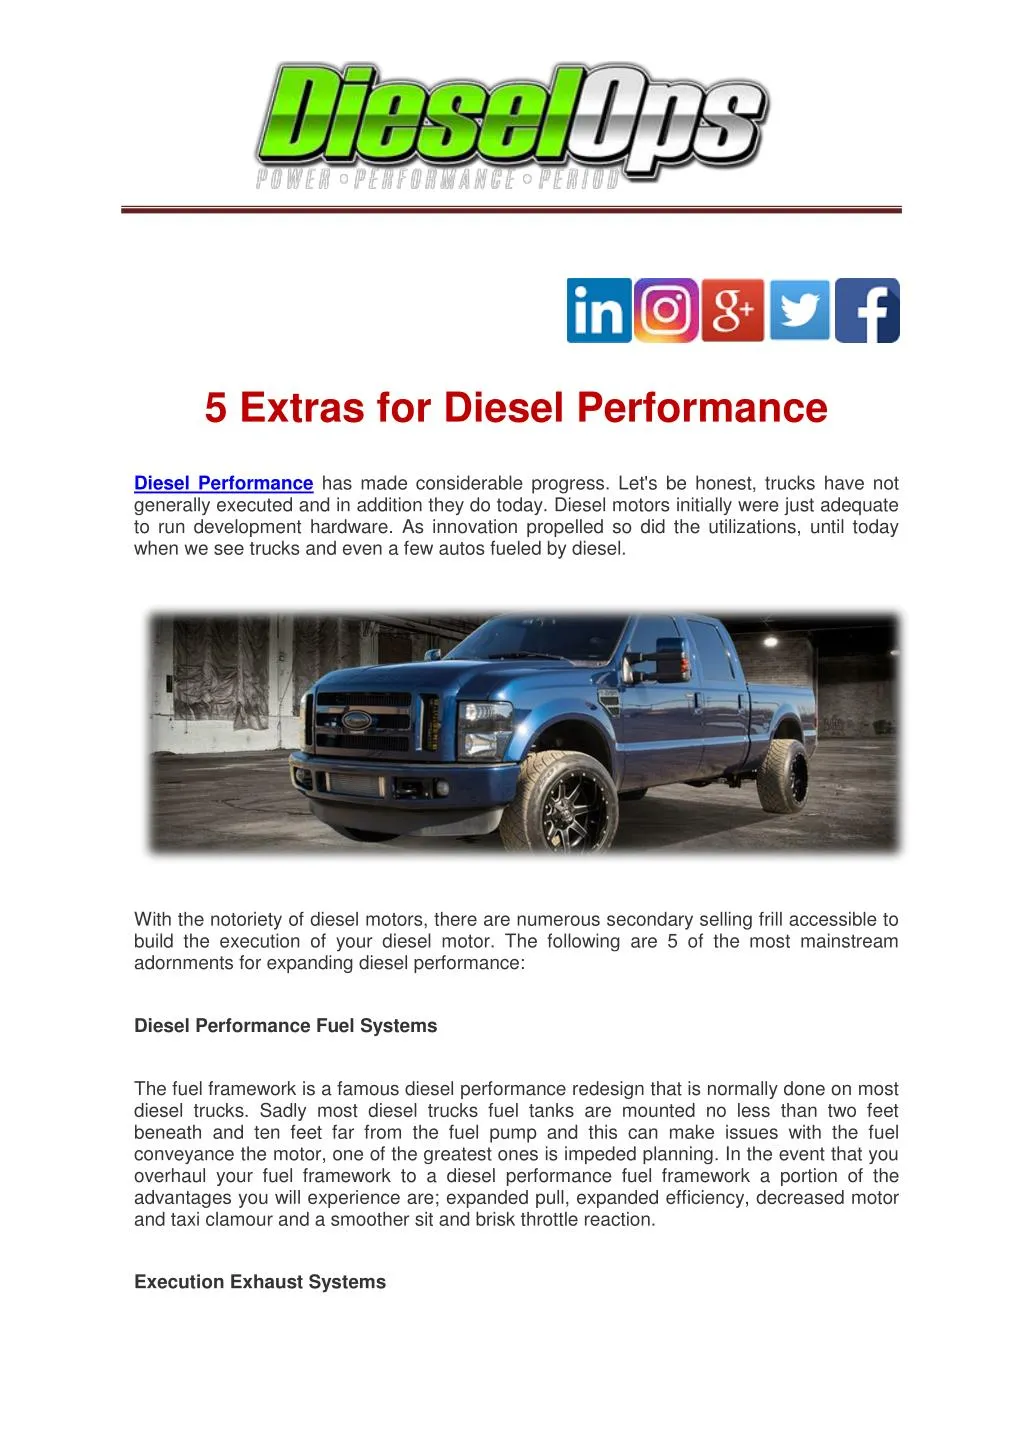 5 extras for diesel performance